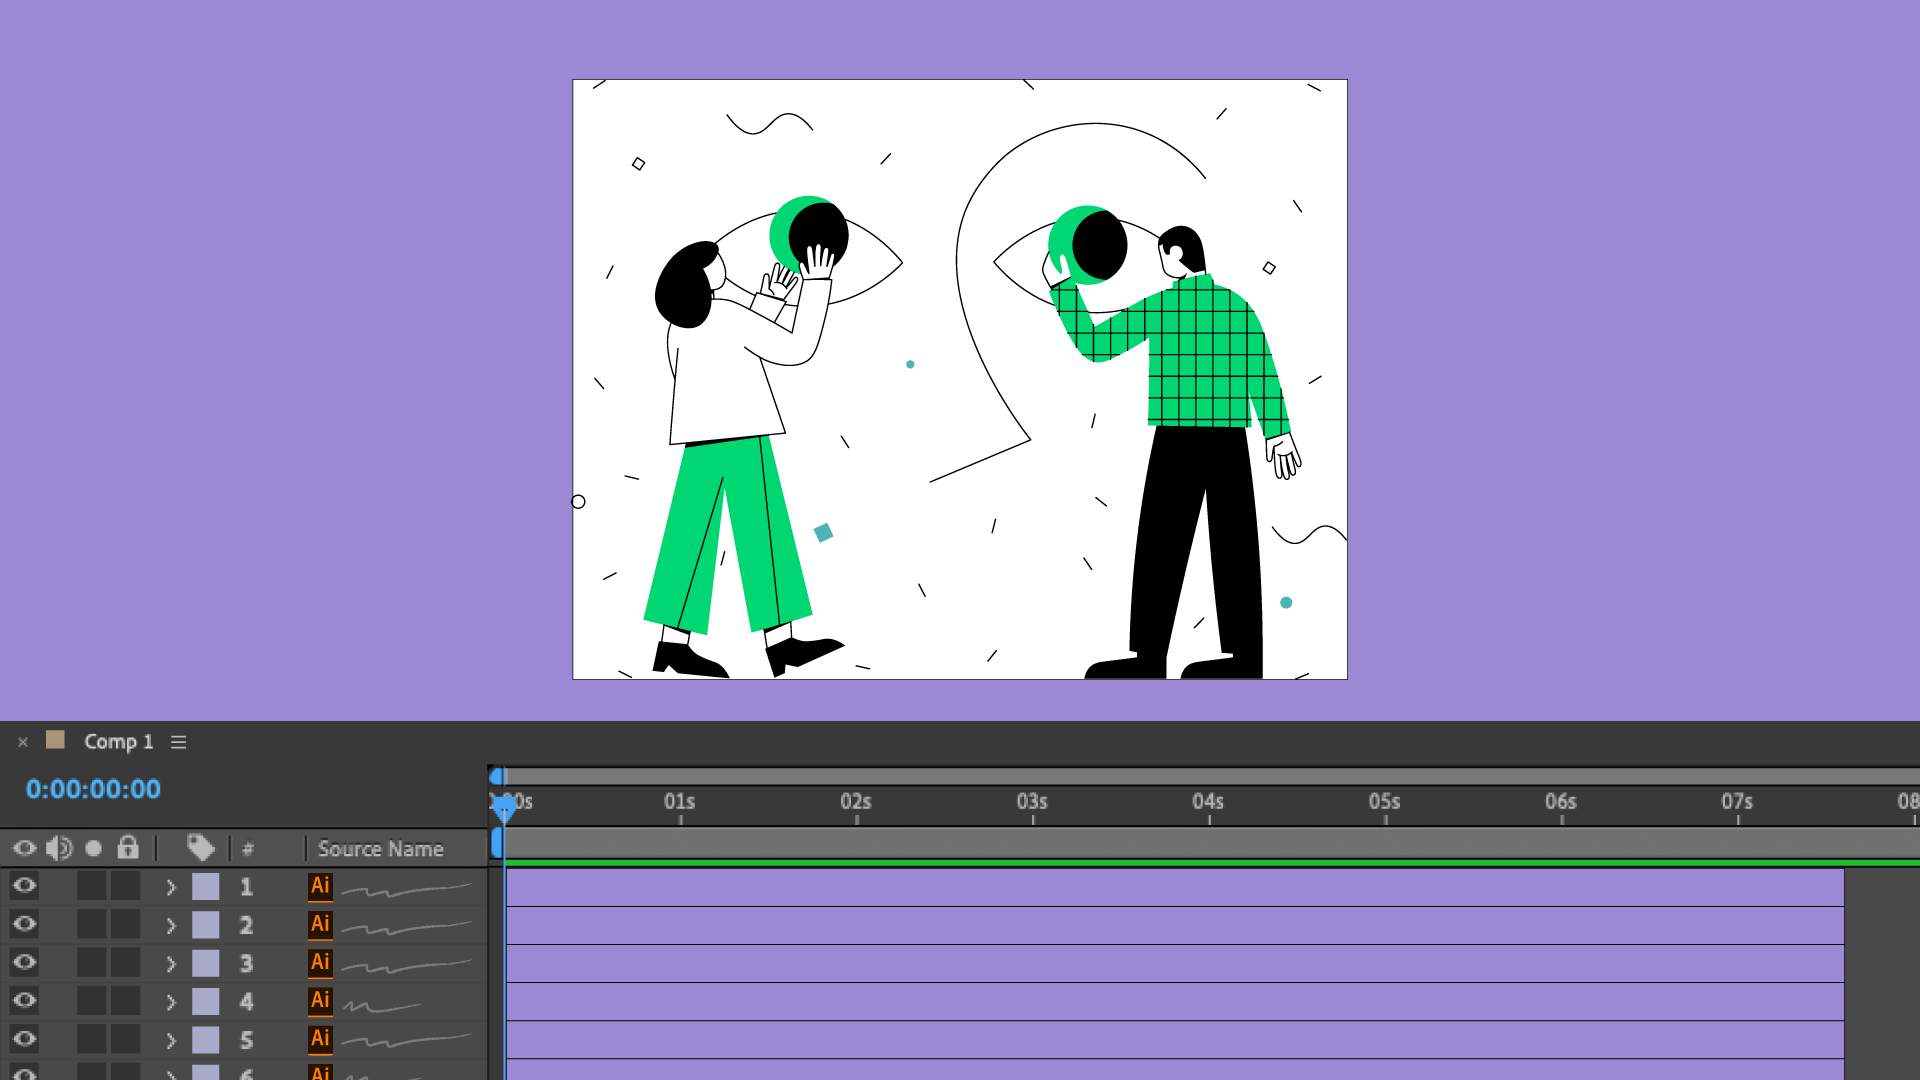 after effects animation basics